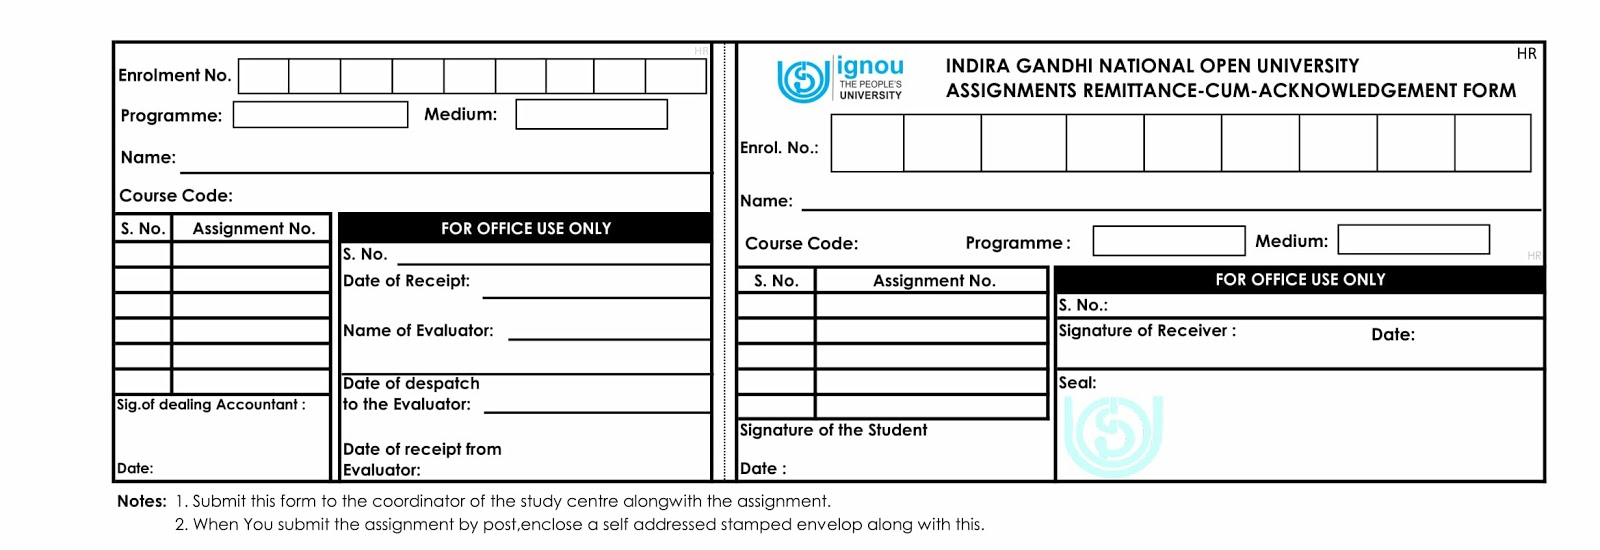 ignou assignment submission form